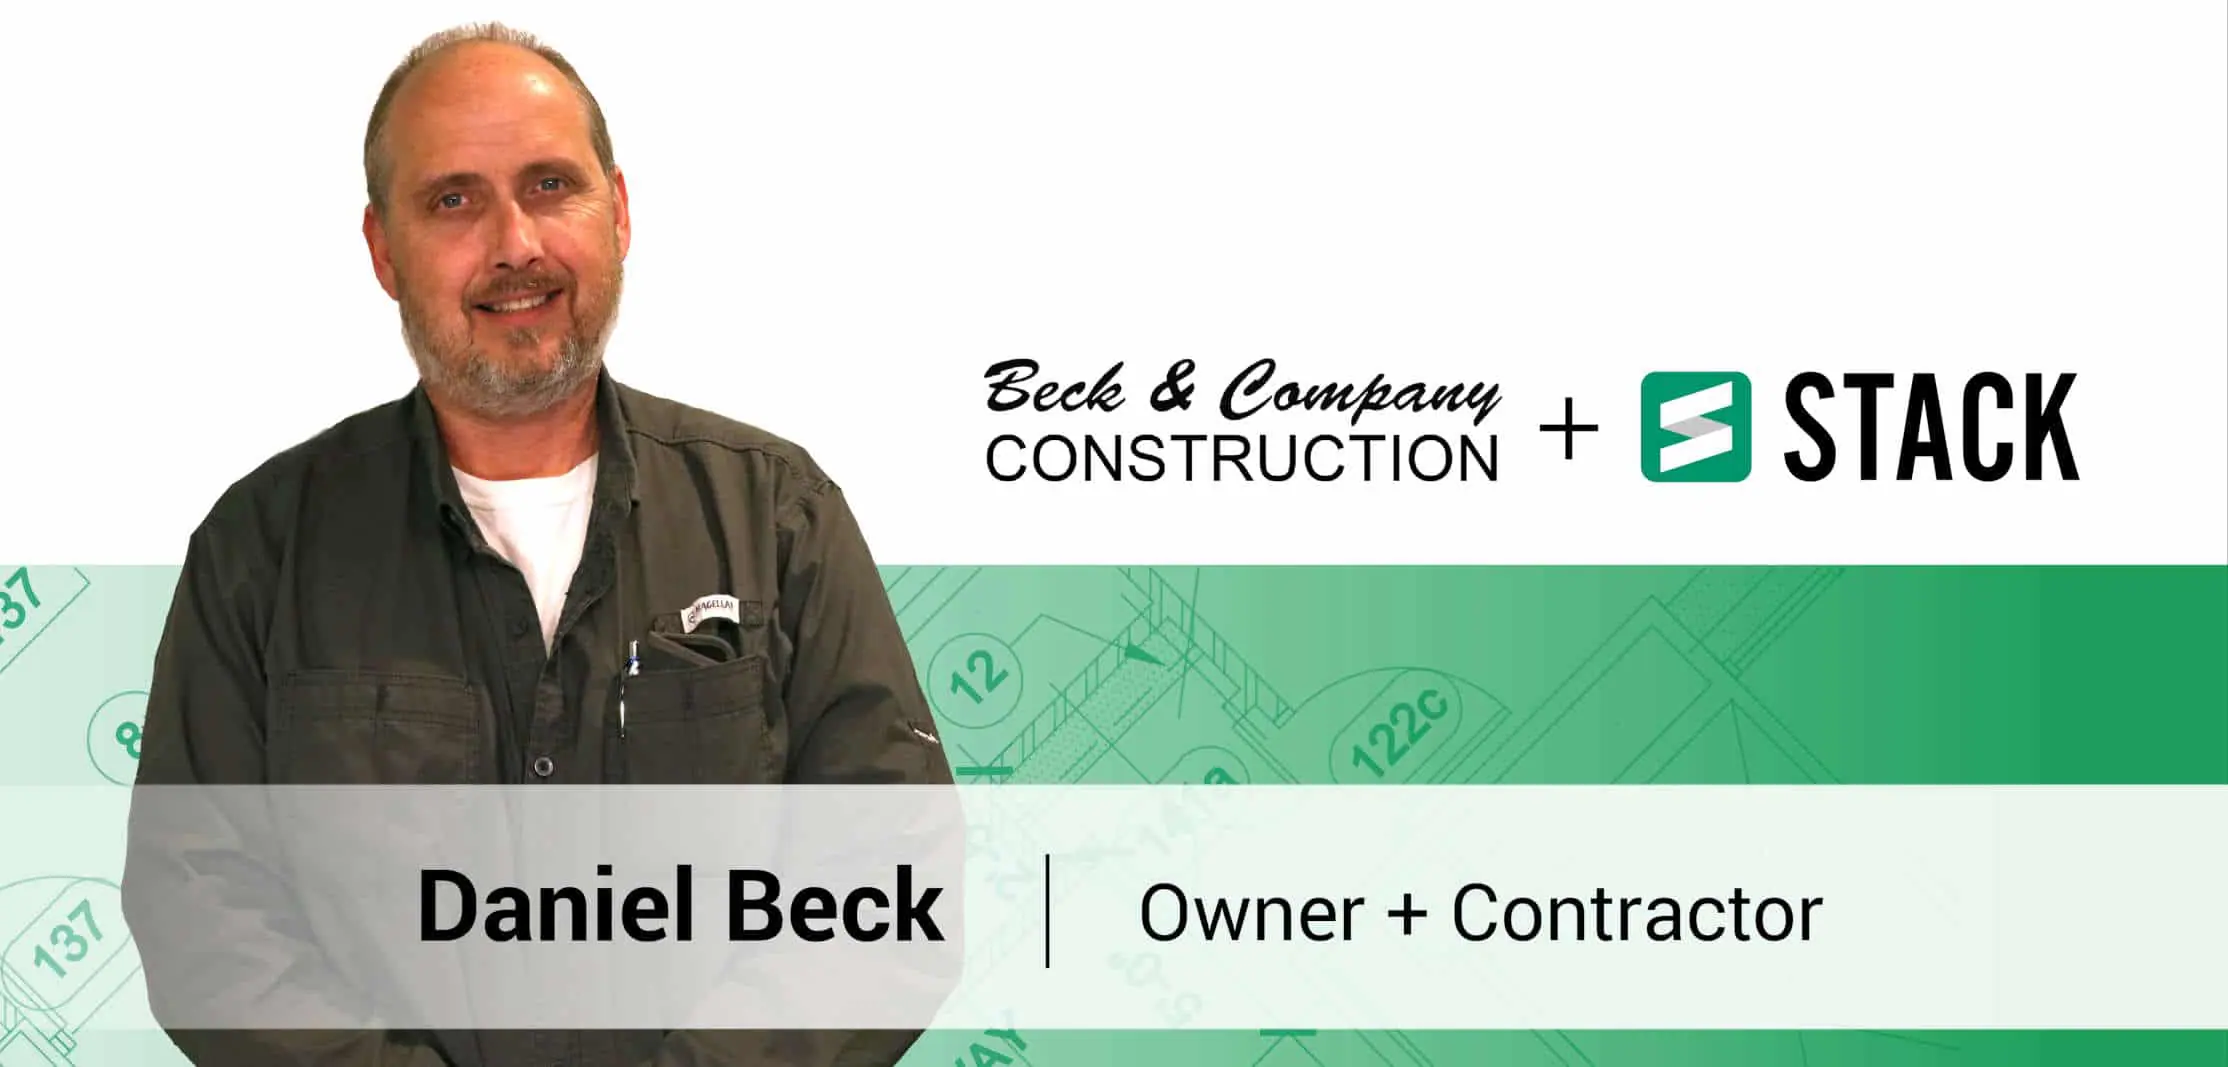 Beck & Company Construction and STACK